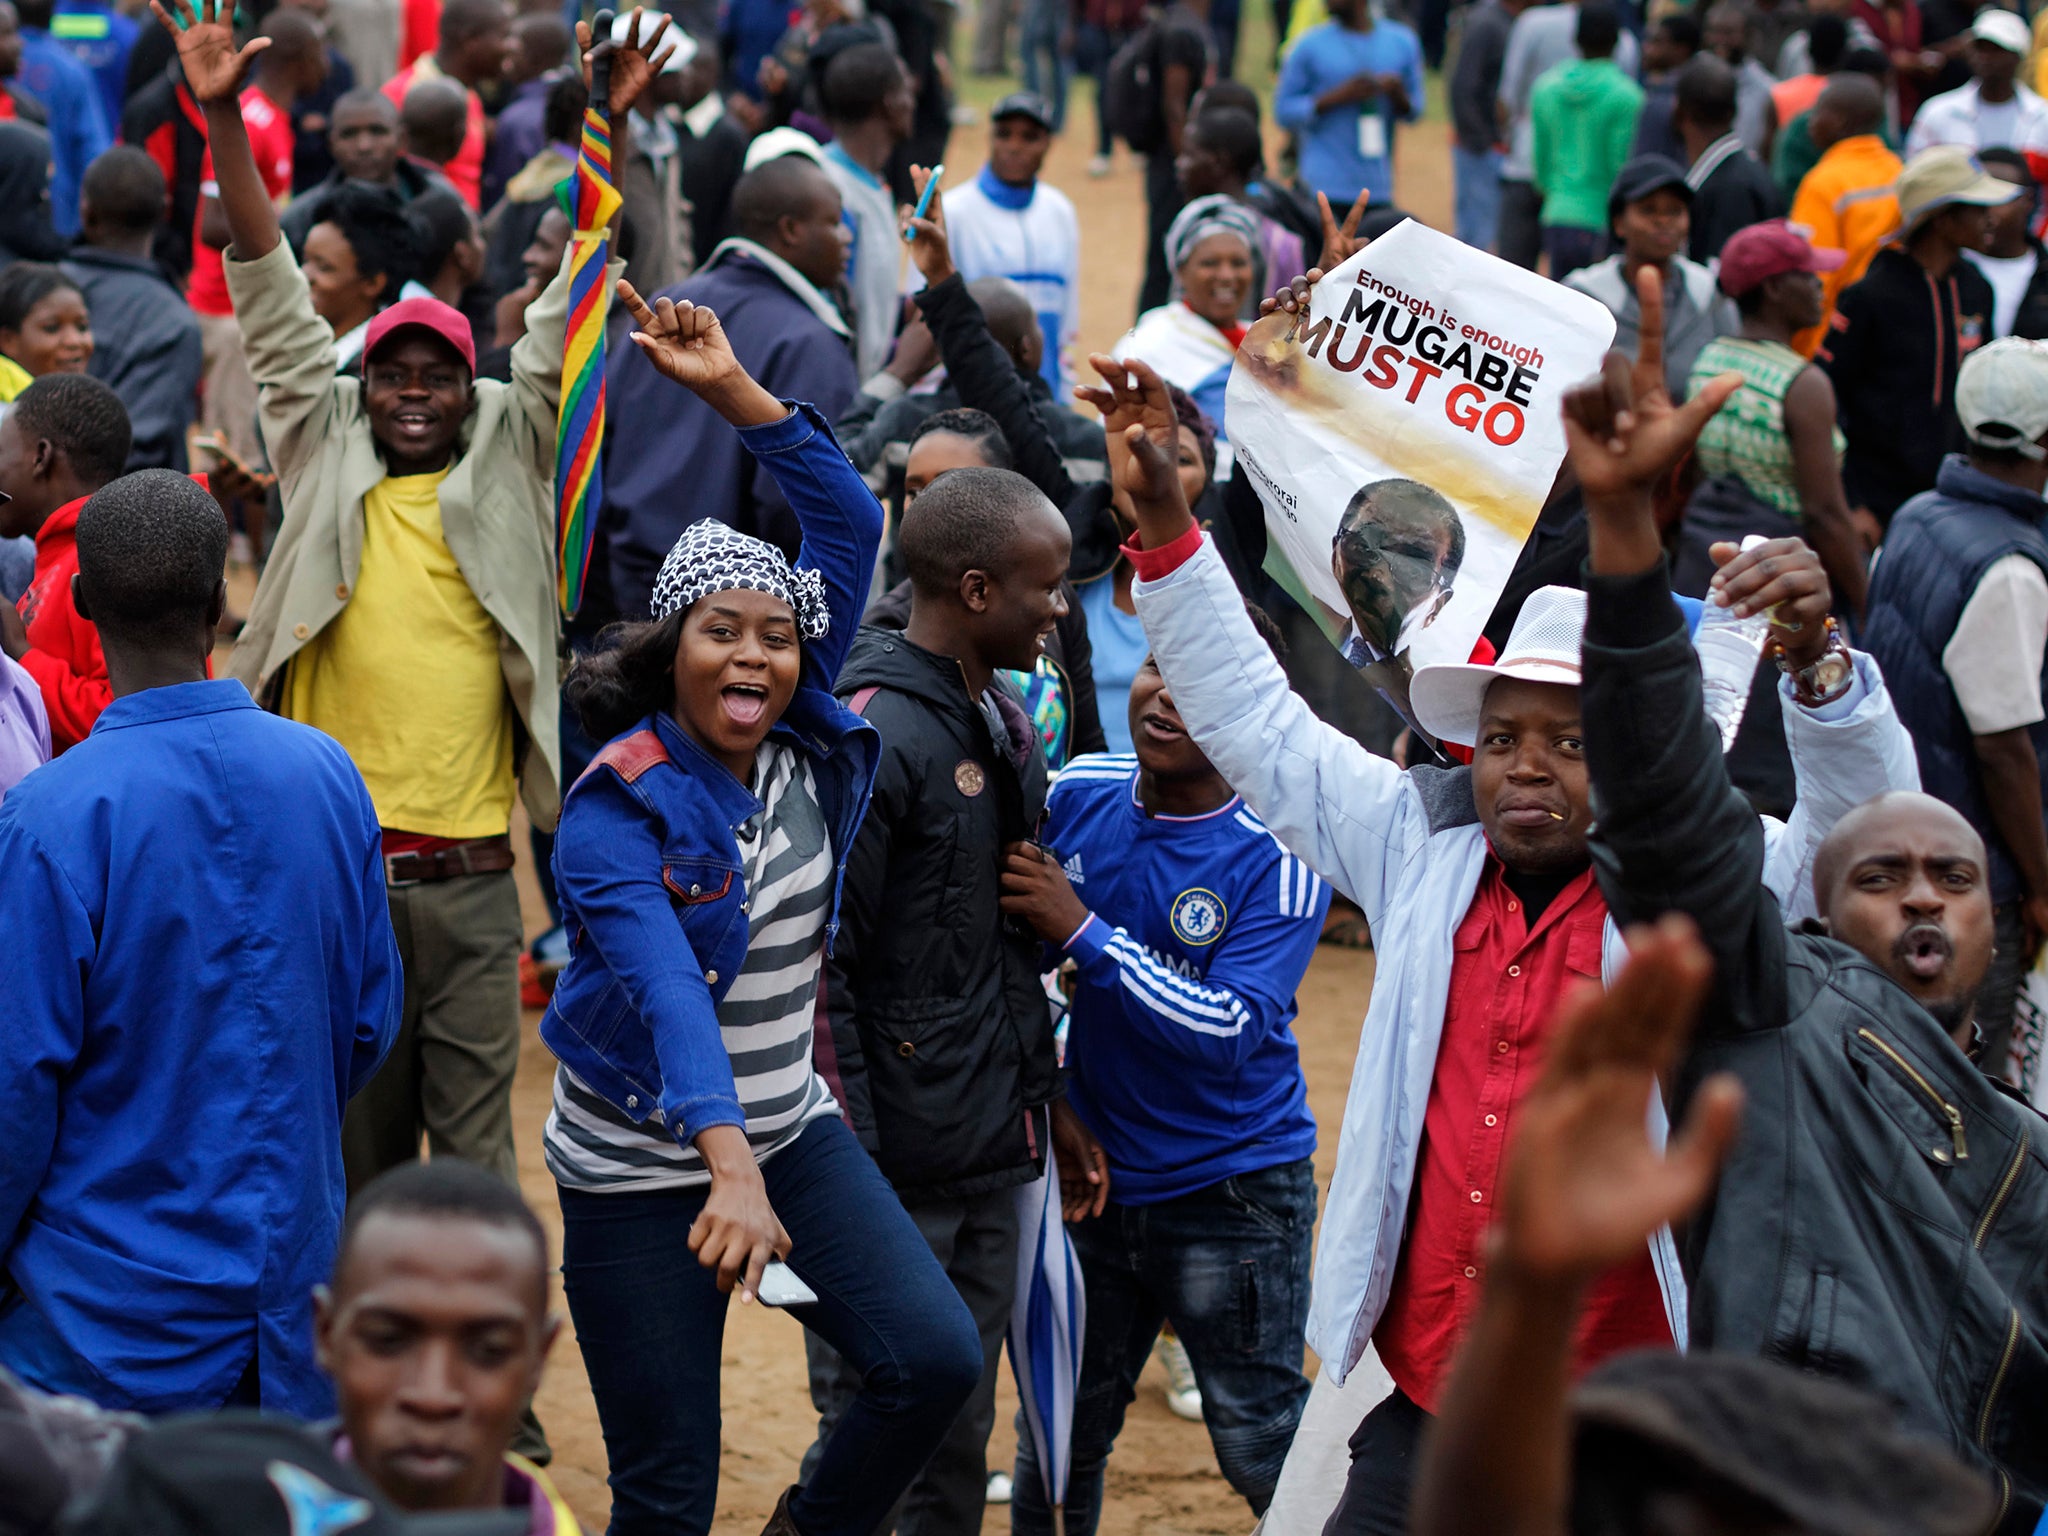 Tens of thousands of demonstrators have taken to the streets in the country’s capital Harare